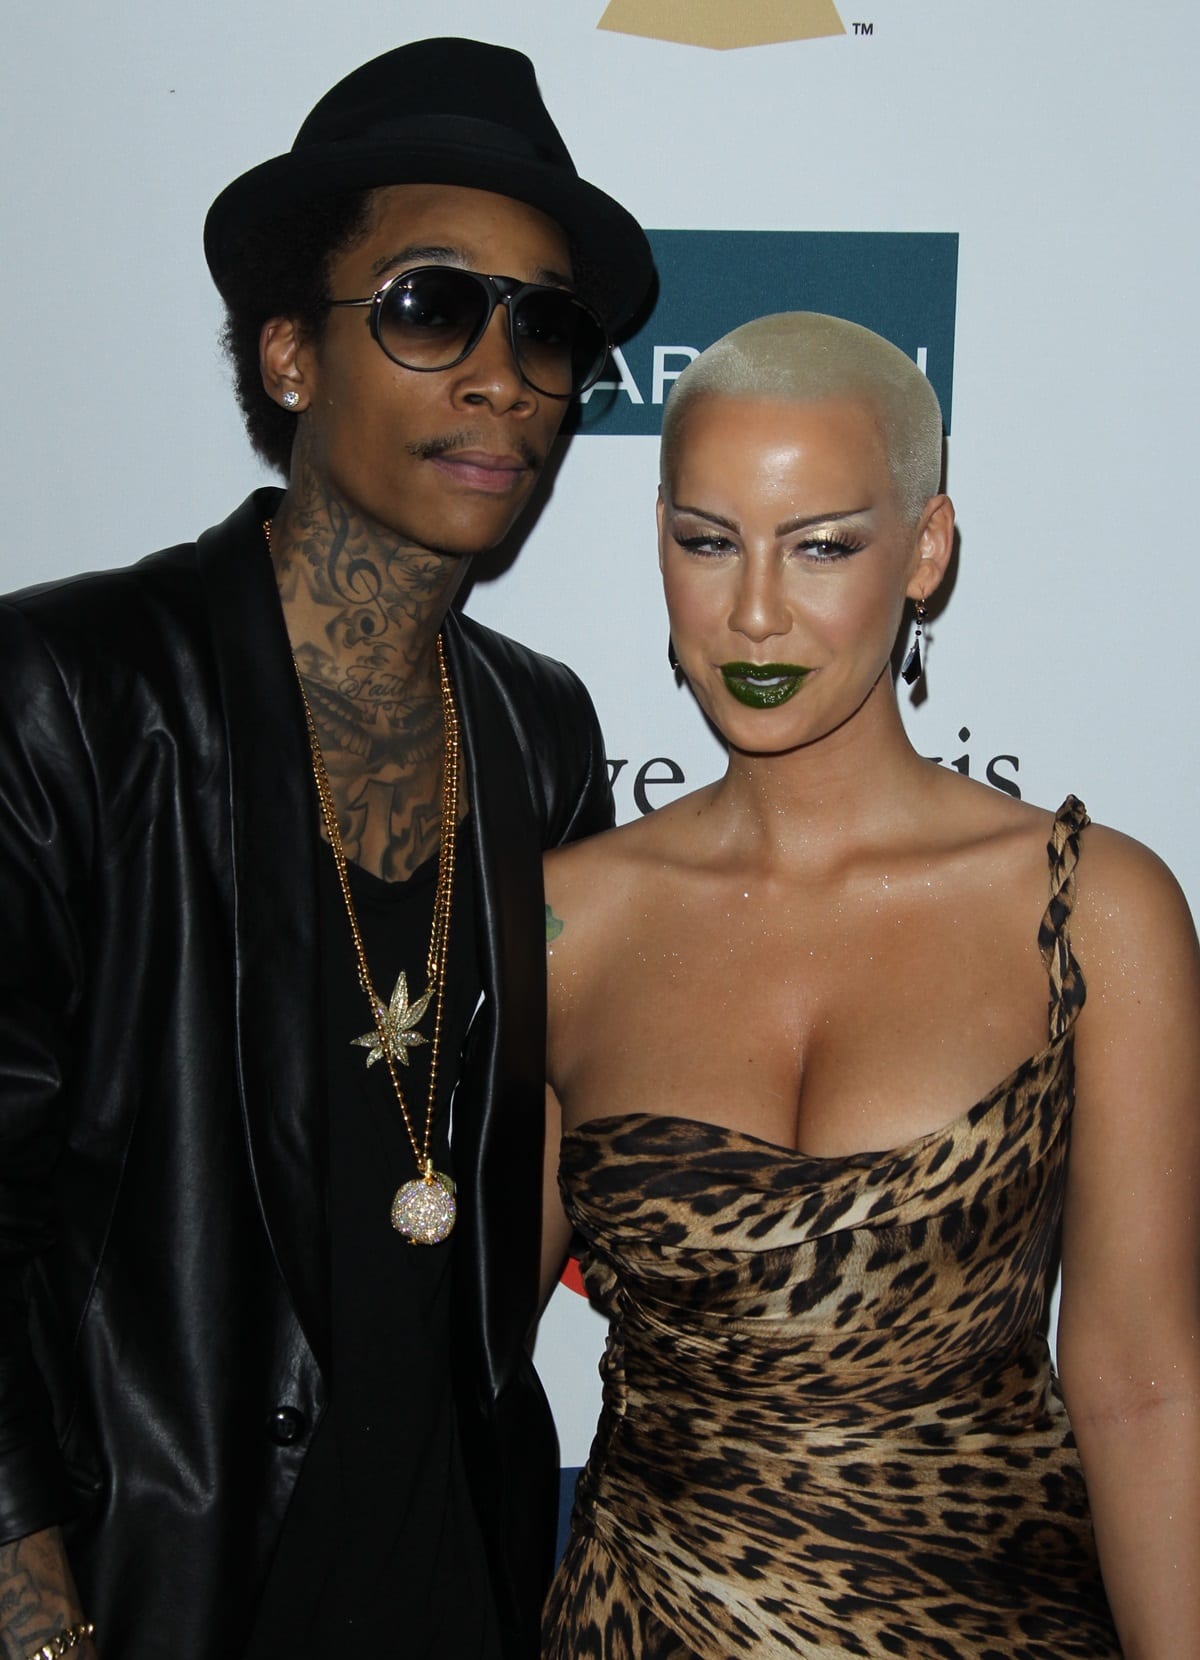 Wiz Khalifa and Amber Rose met on Twitter in 2011, began dating, got engaged in March 2013, married in July 2013, and had a son named Sebastian in February 2013, but later divorced in September 2016 after Amber Rose filed for divorce in September 2014 due to irreconcilable differences.